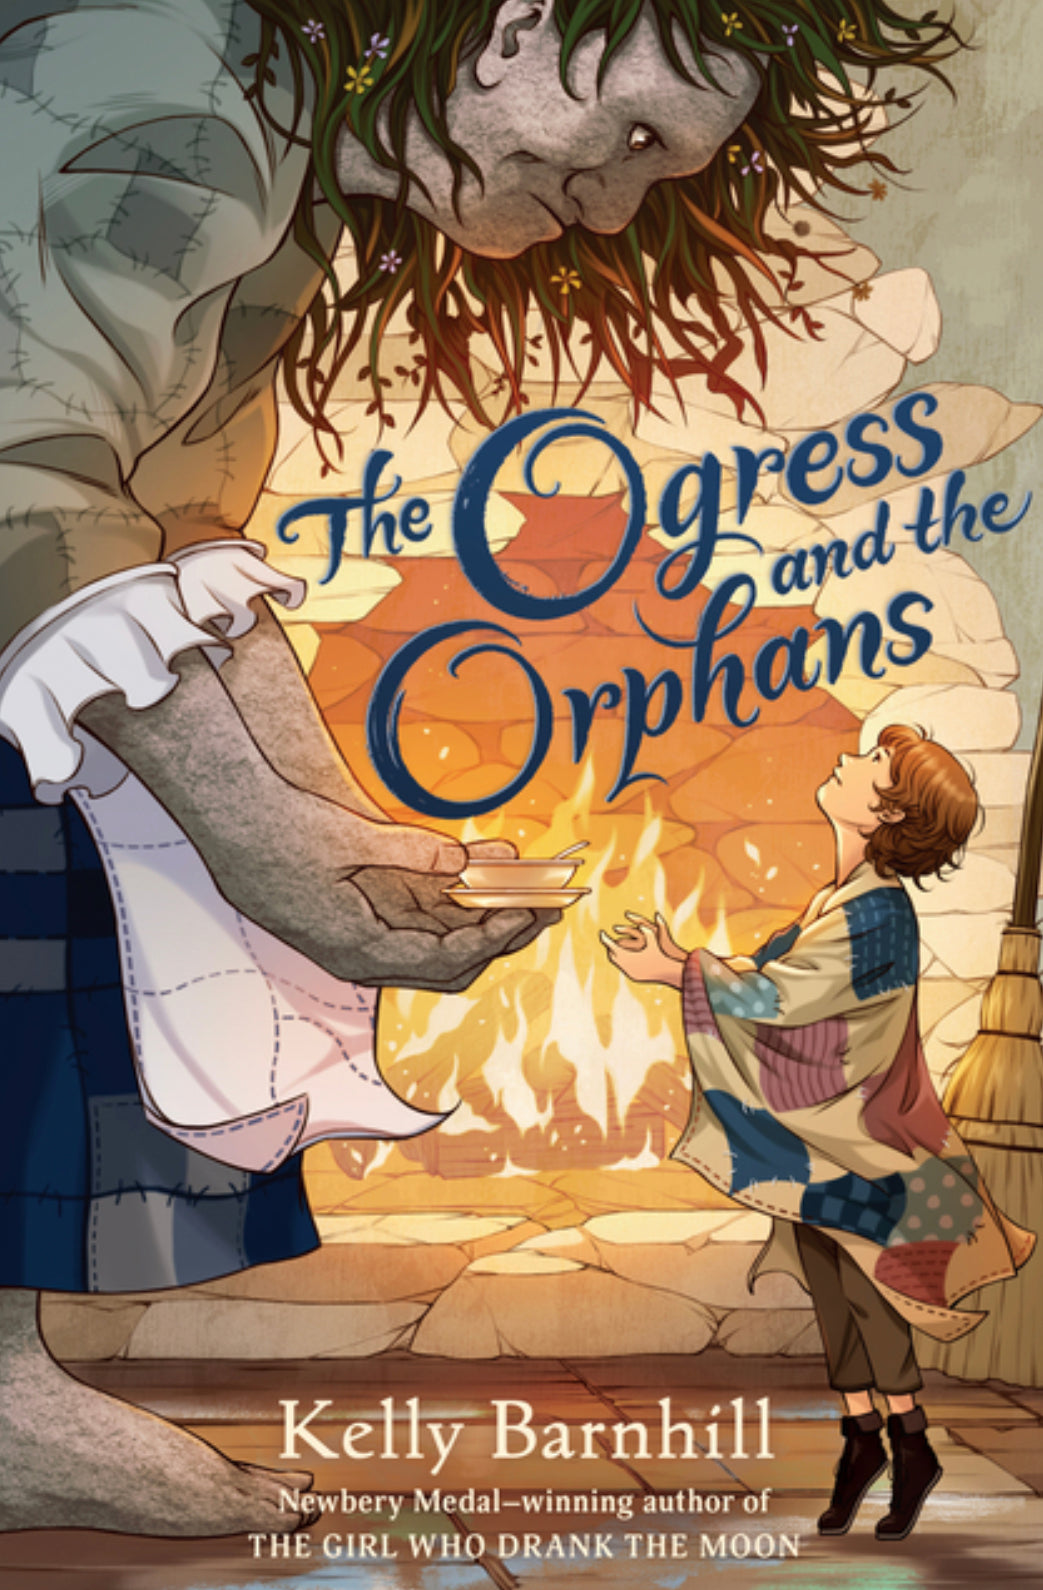 The Ogress and the Orphans | Middle Grade Fiction - Alder & Alouette